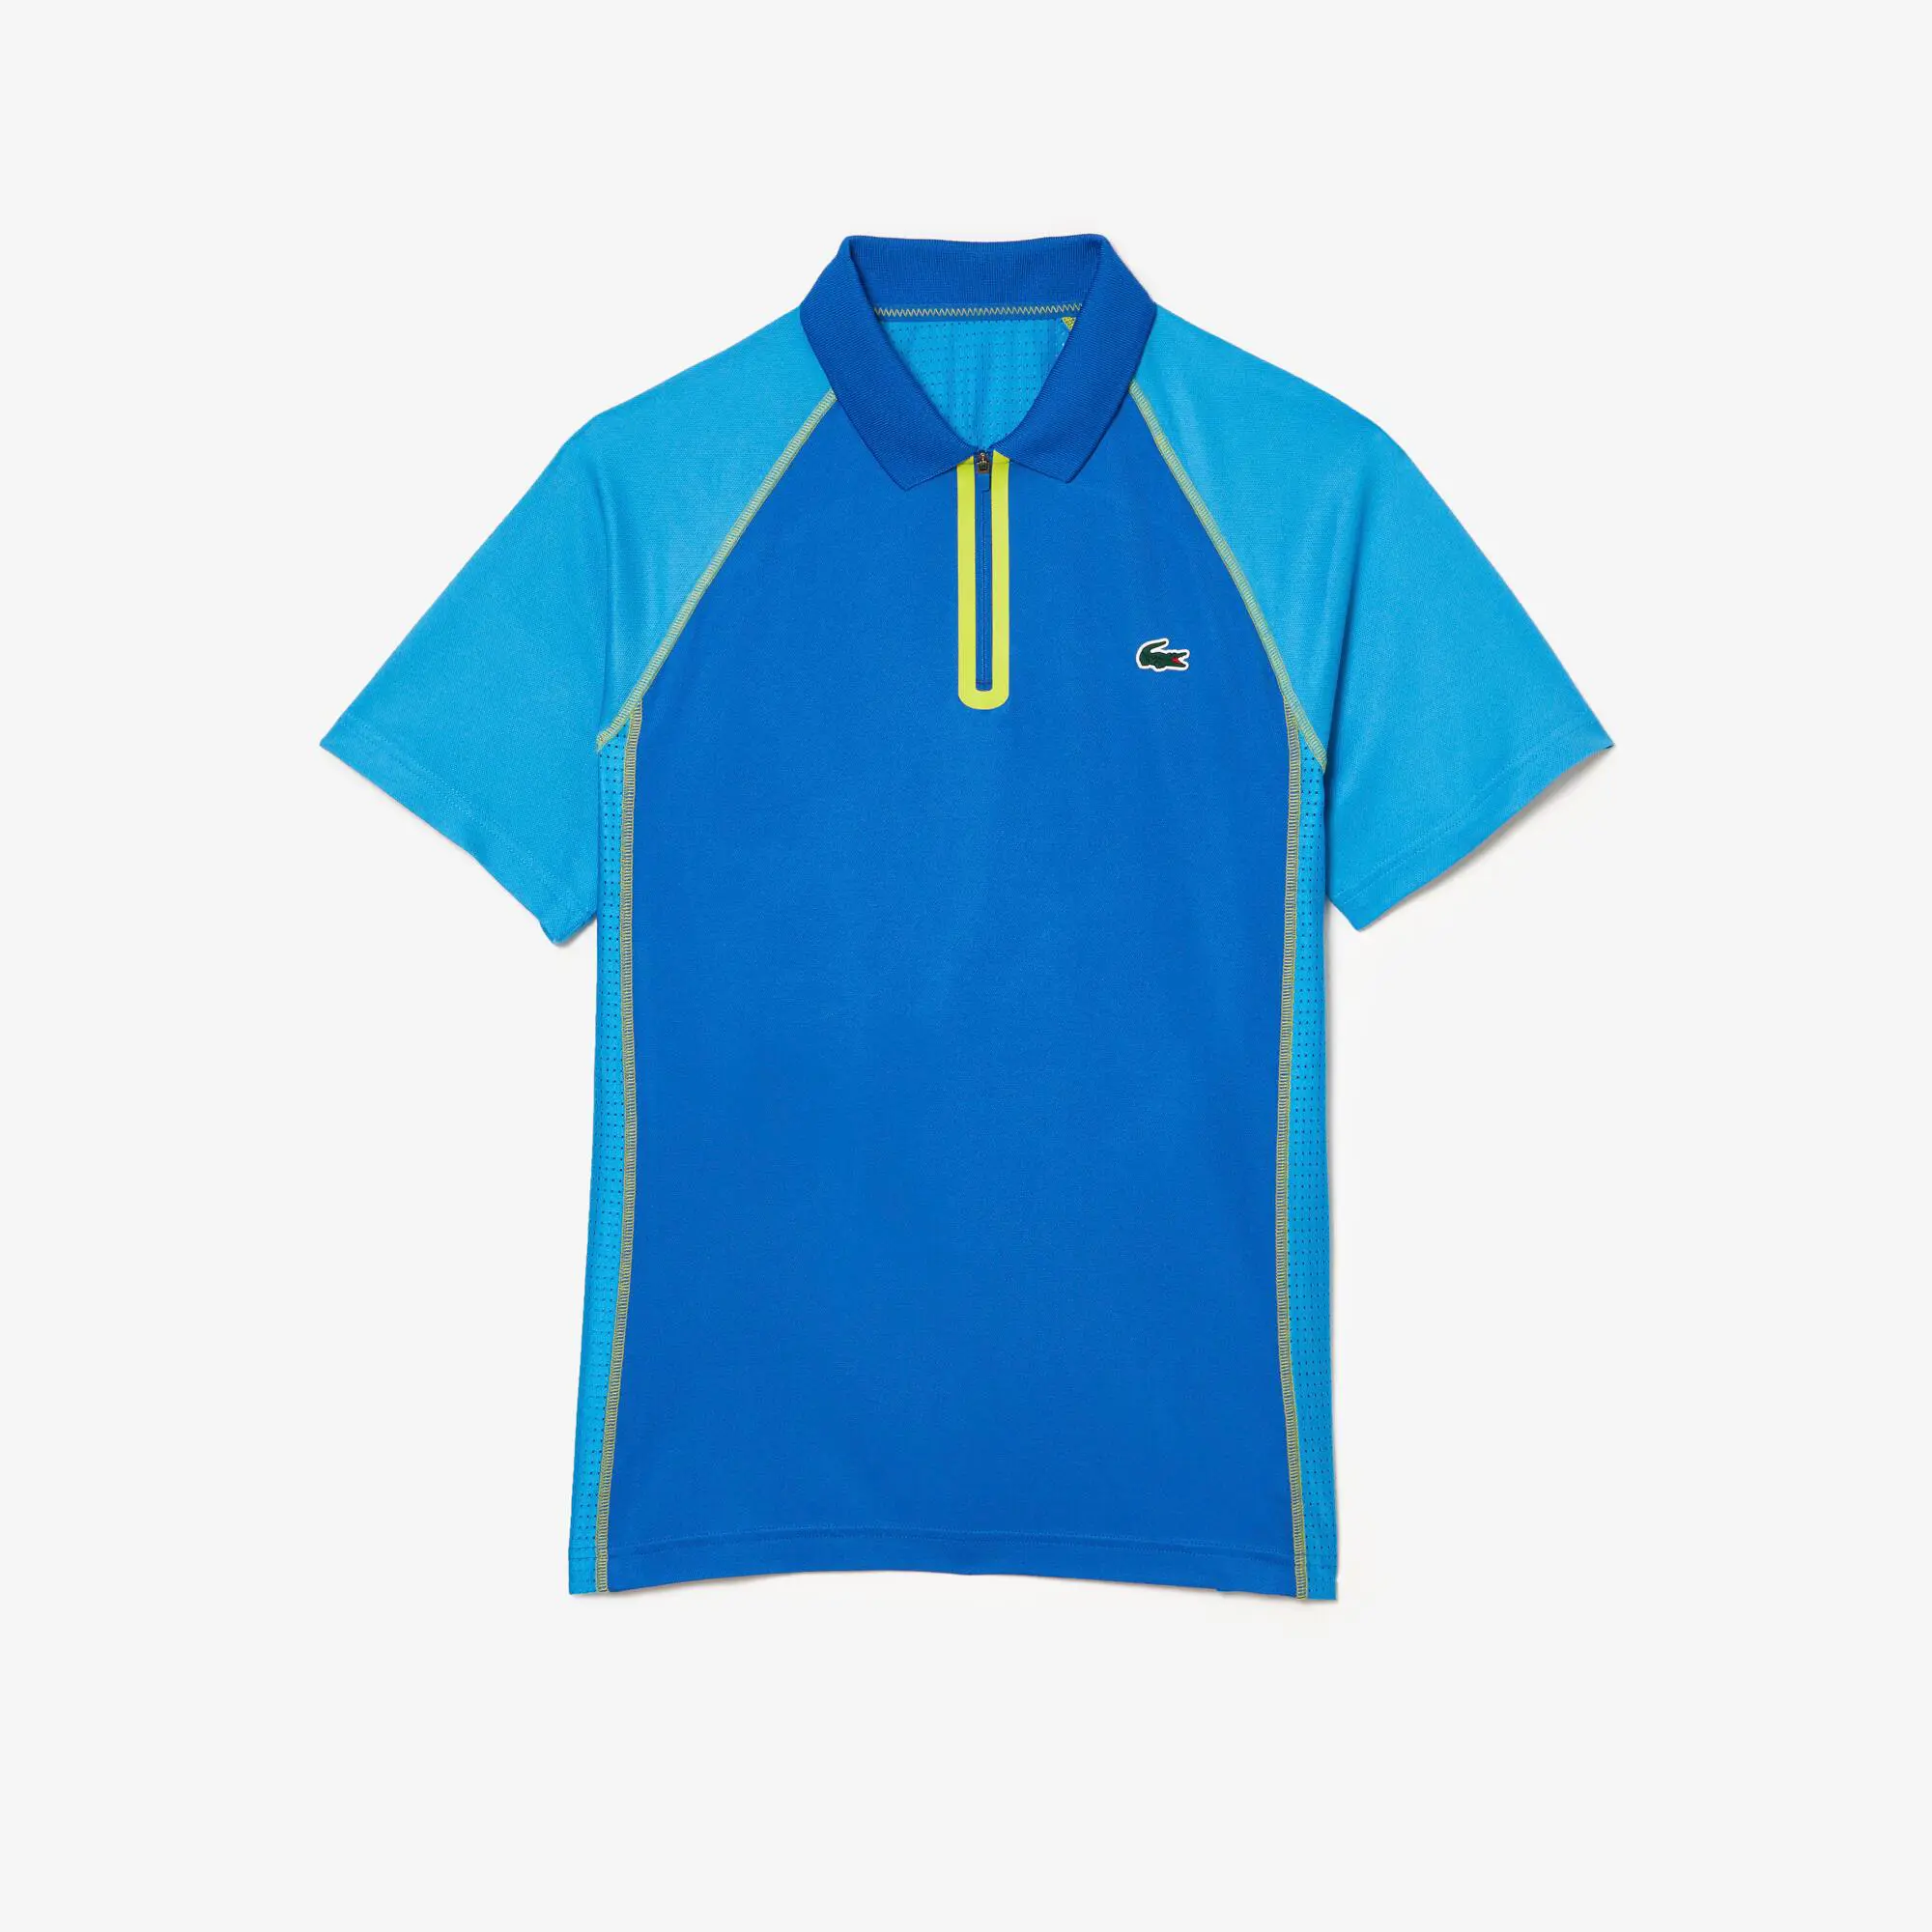 Lacoste Men’s Lacoste Tennis Recycled Polyester Polo Shirt with Ultra-Dry Technology. 2